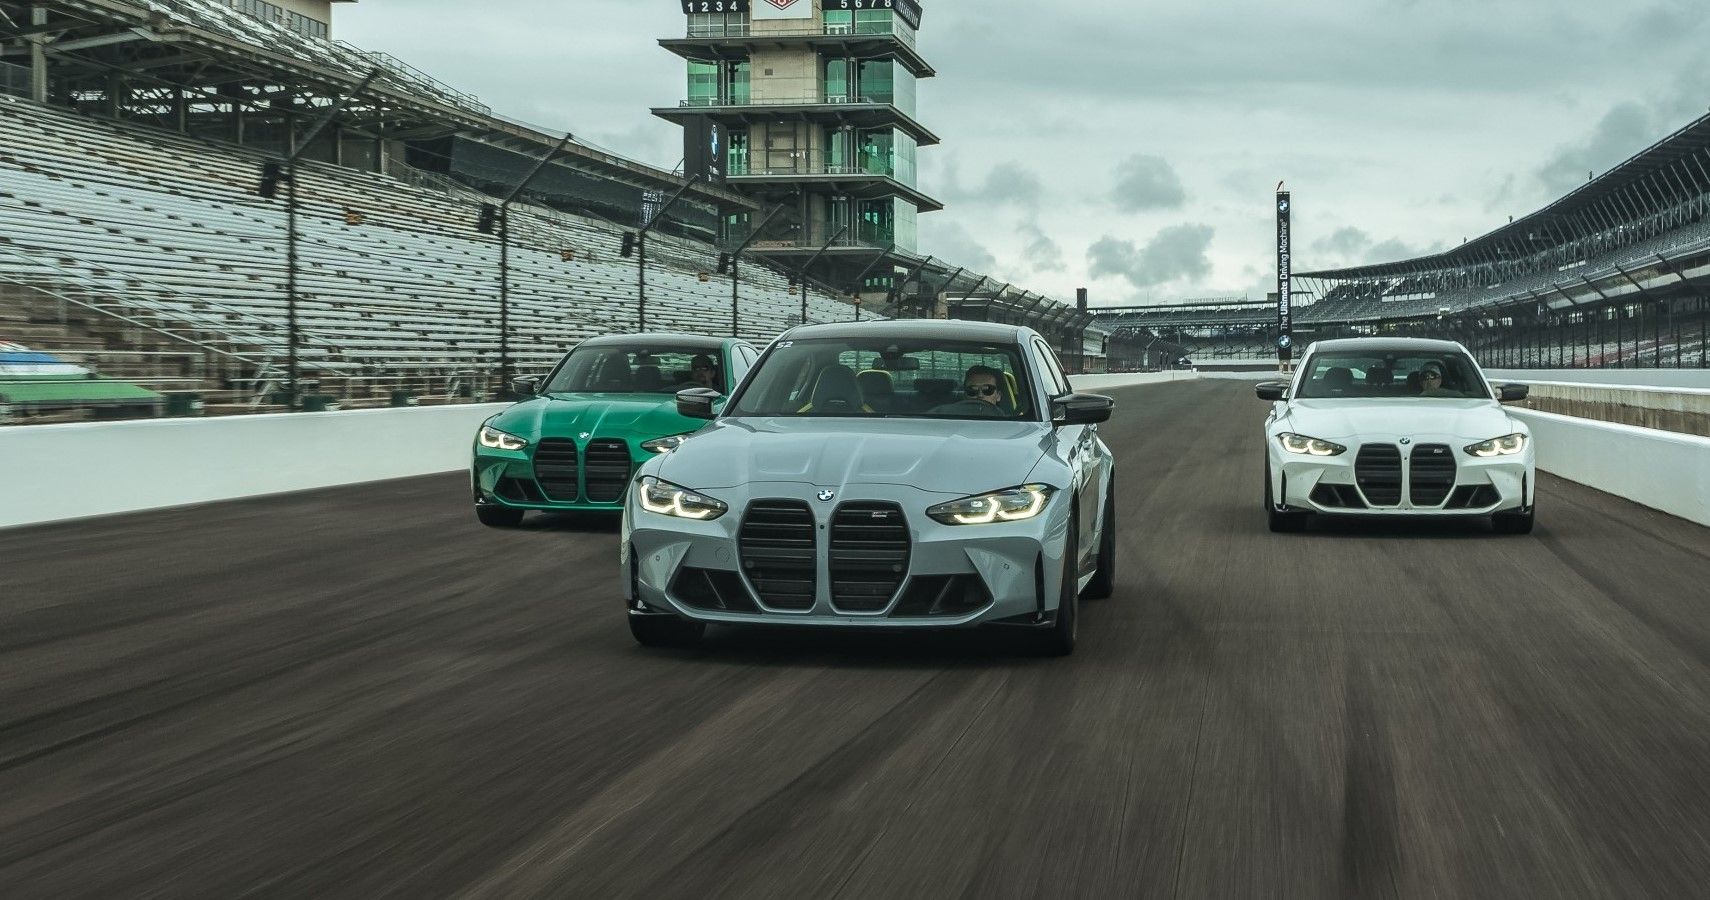 BMW M3 and M4 family at the racetrack